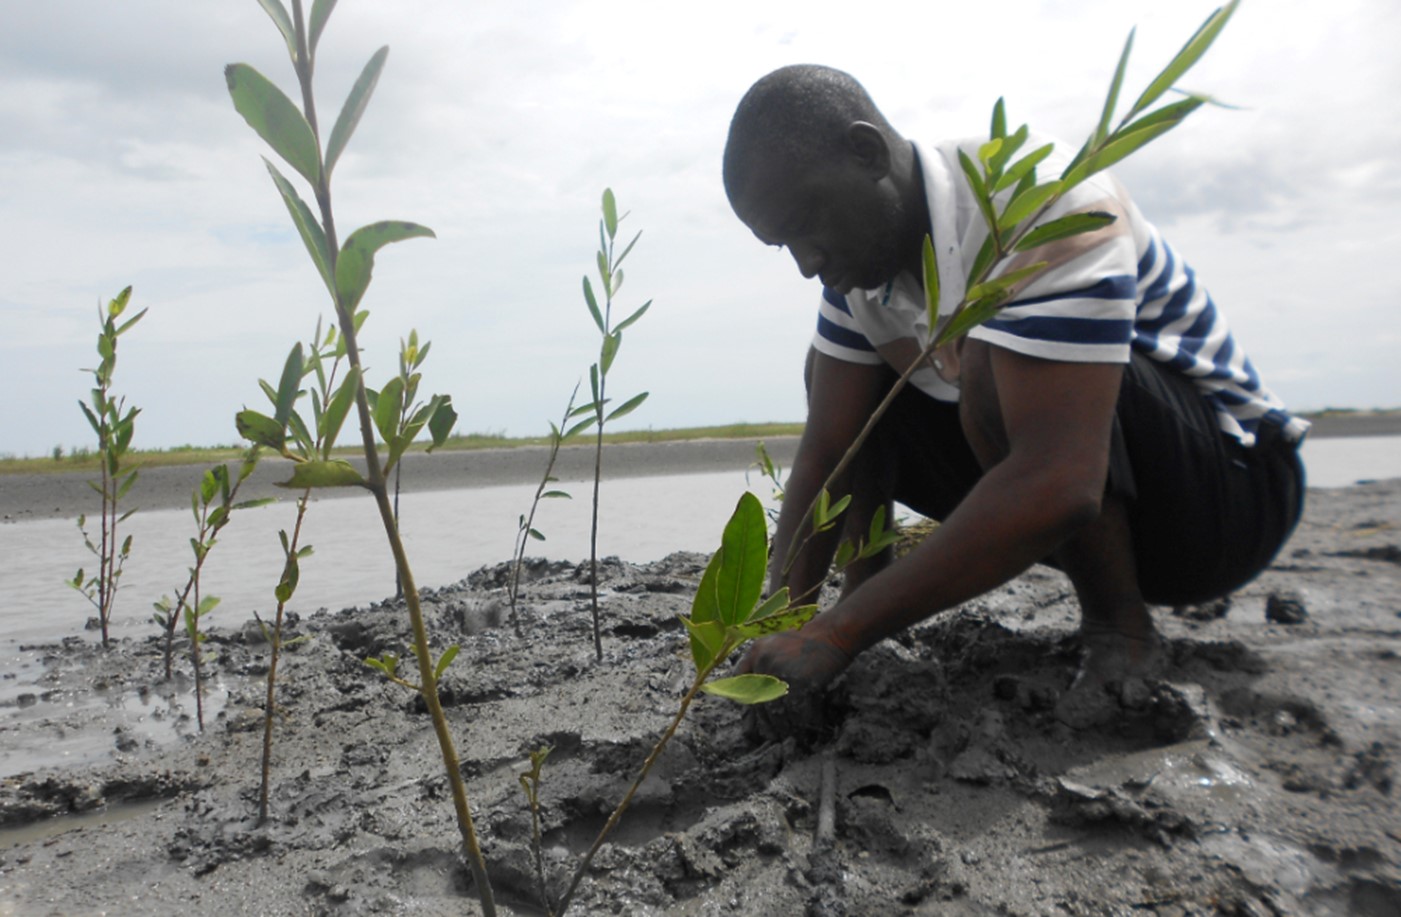 Photo : 4,125 mangrove trees have been planted near Boffa in Guinea